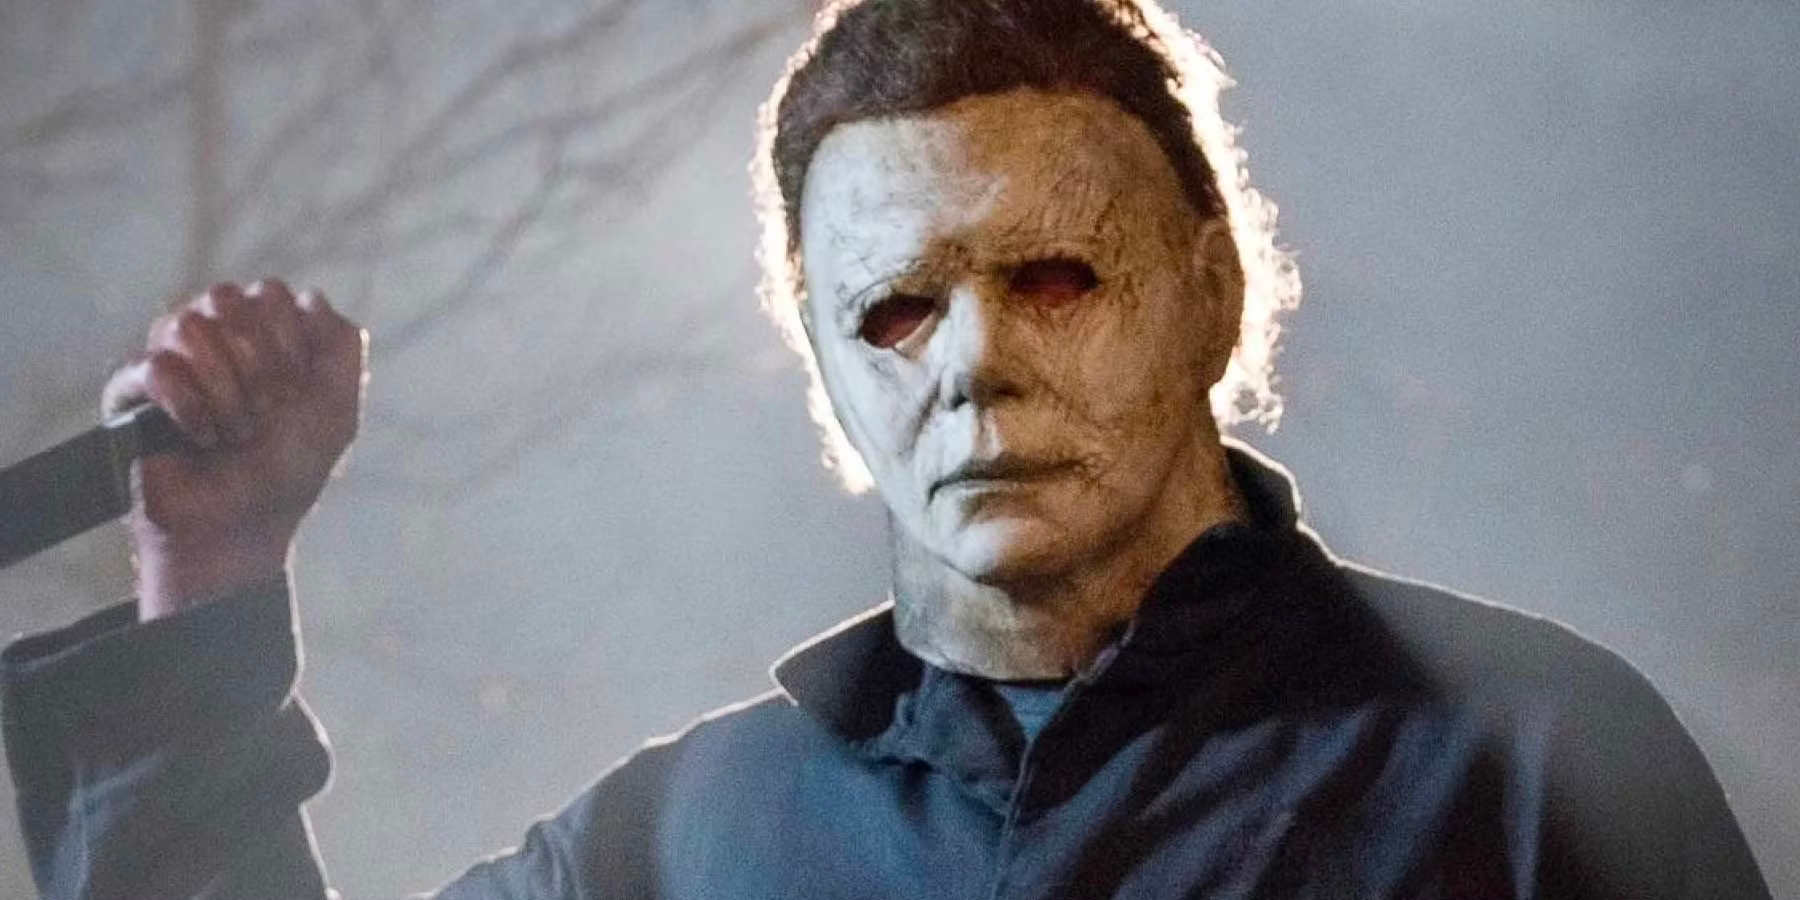 Michael Myers is holding a knife in his hand.